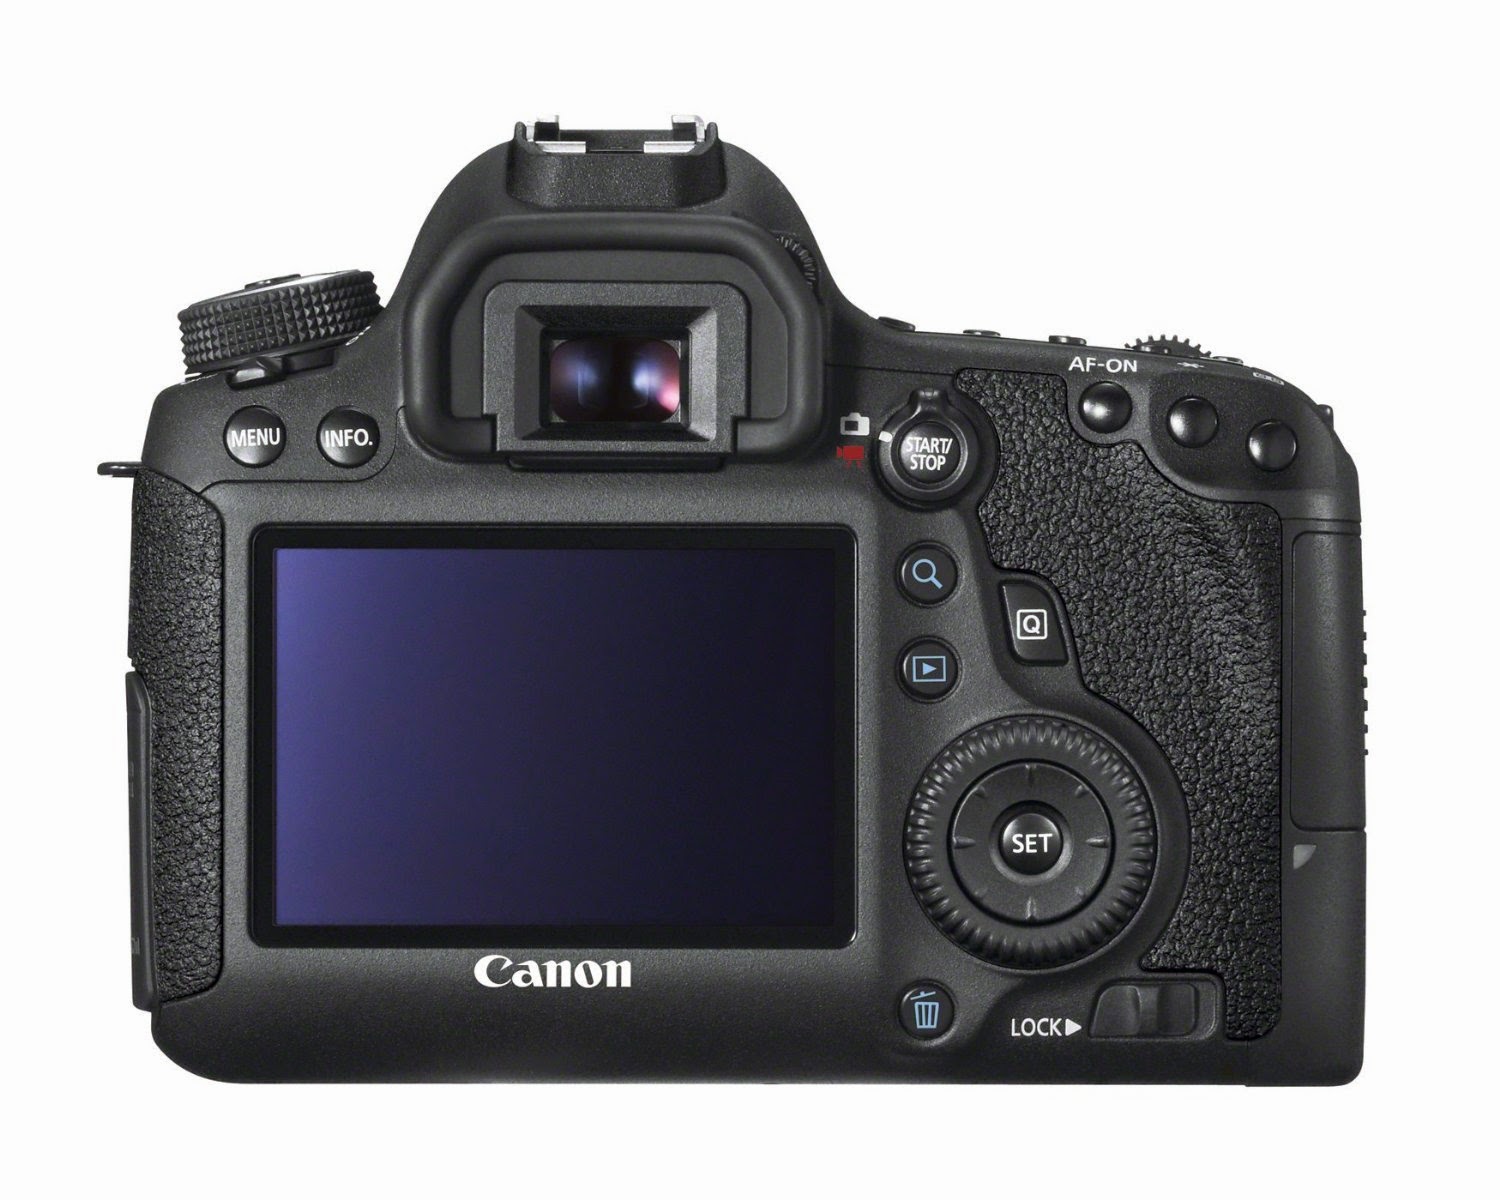 Canon EOS 6D 20.2 MP CMOS Digital SLR Camera, reviewed, picture of rear